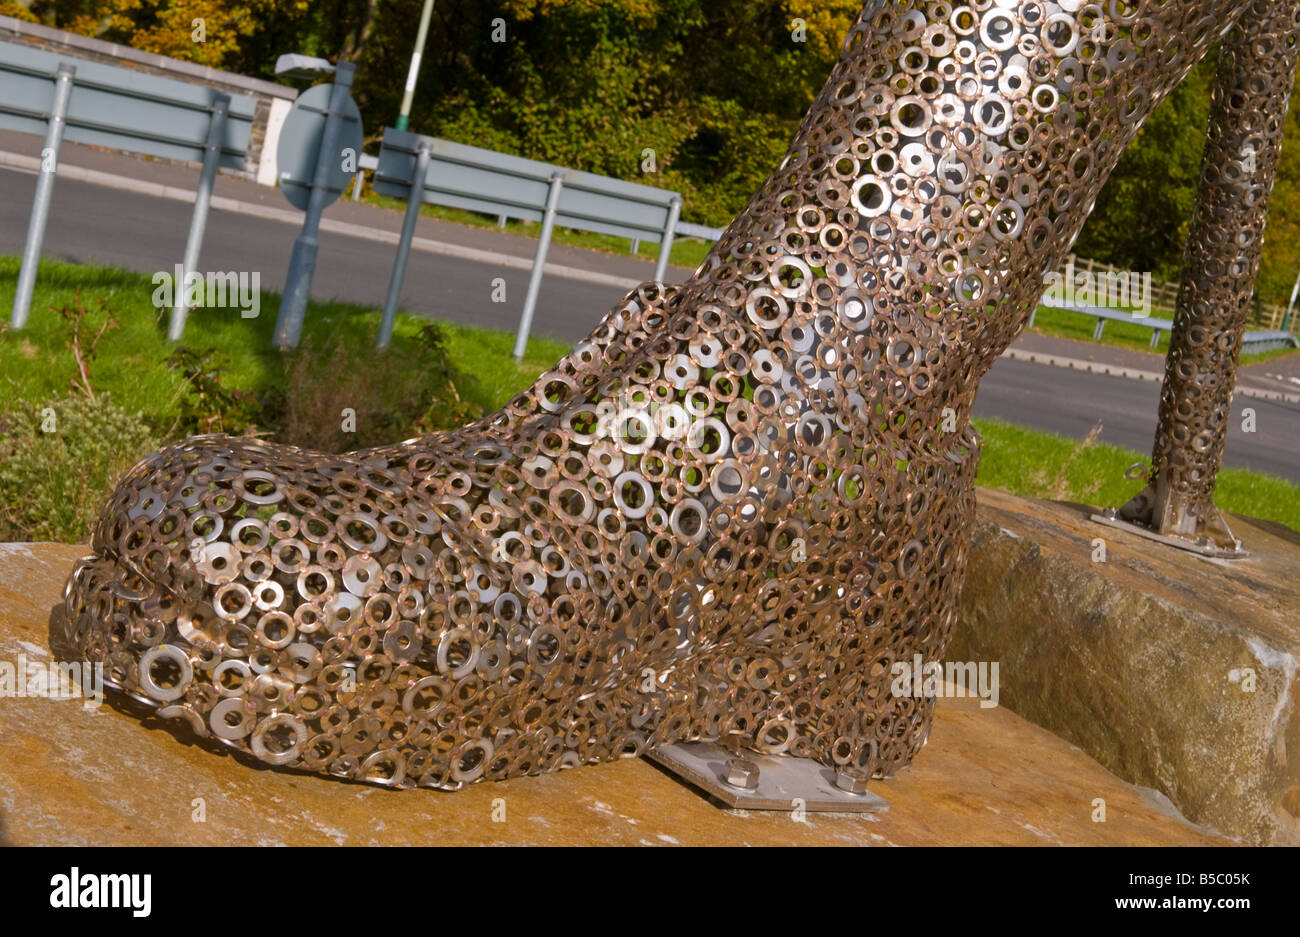 Chartist sculpture made from 27000 steel washers welded by artist Sebastien Boyesen on a roundabout in South Wales UK Stock Photo